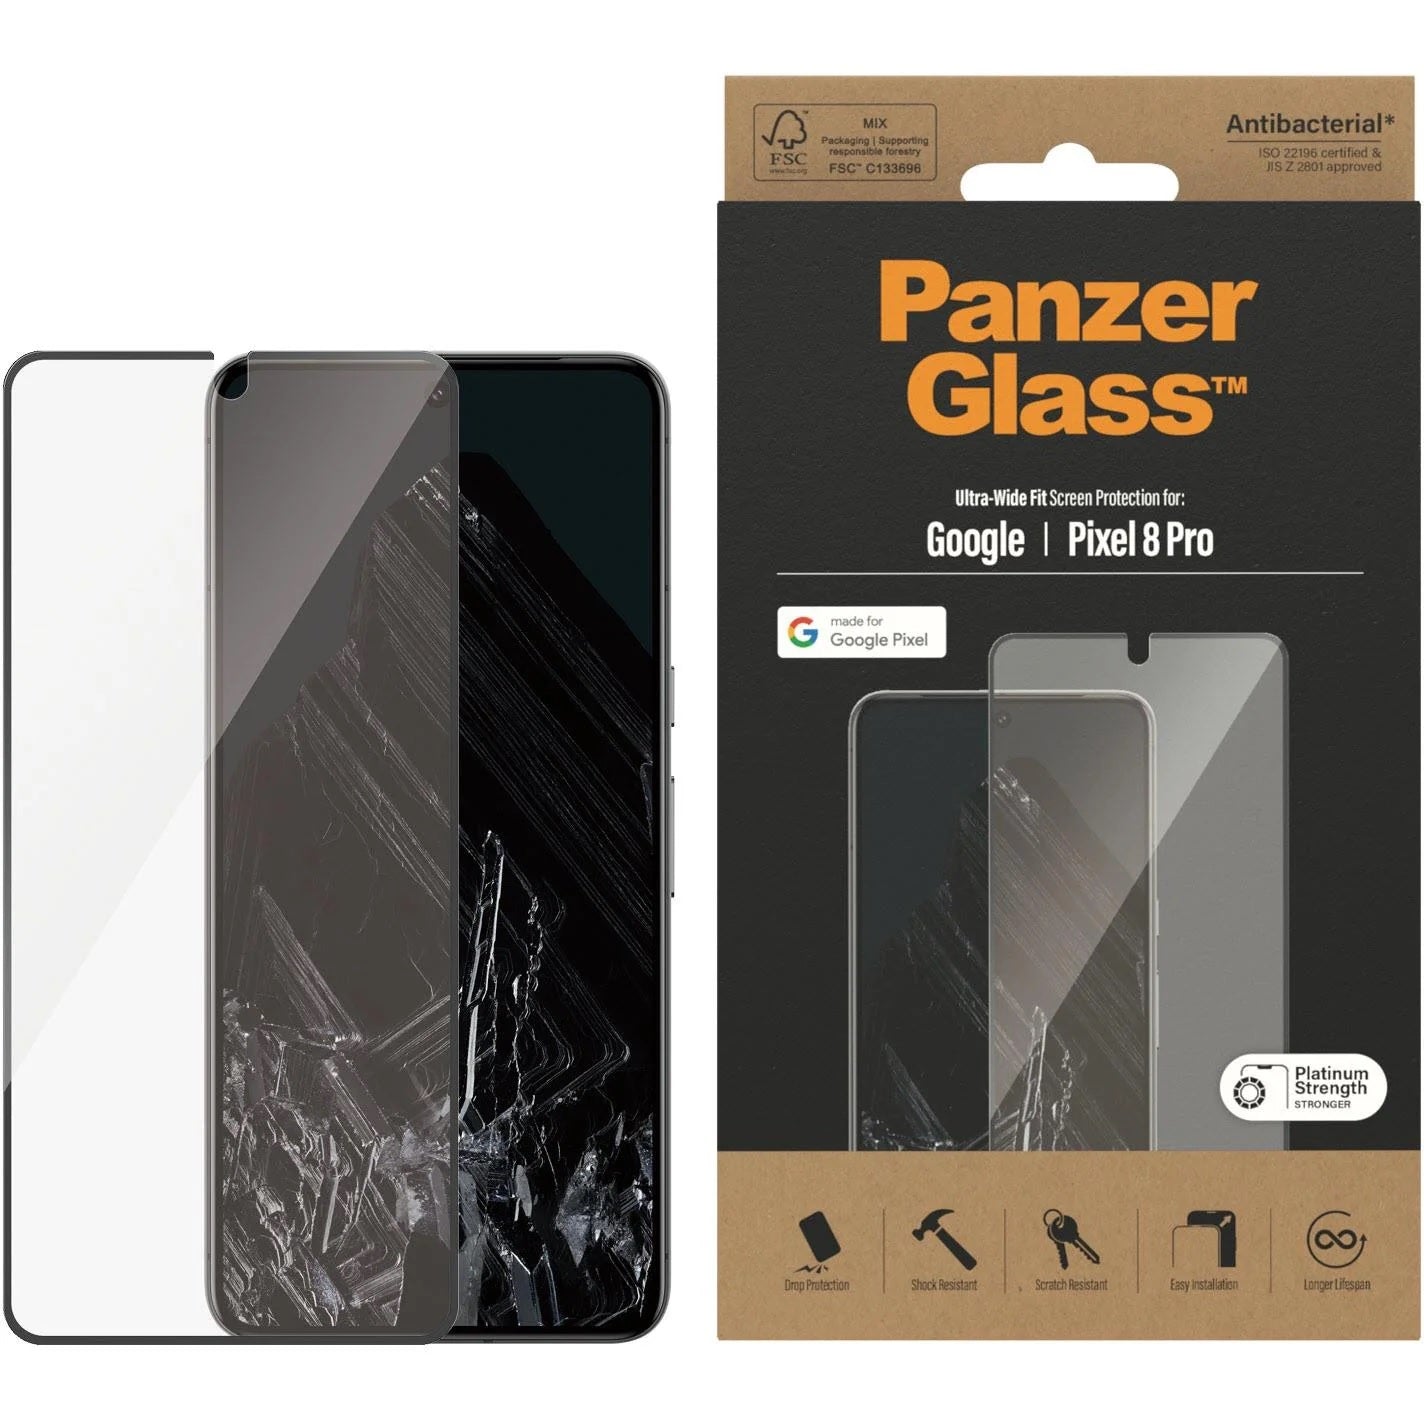 PanzerGlass Google Pixel 8 Pro Screen Protector Ultra-Wide Fit - Clear (4781), Drop Protection, Shock & Scratch Resistant, Platinum Strength, 2YR